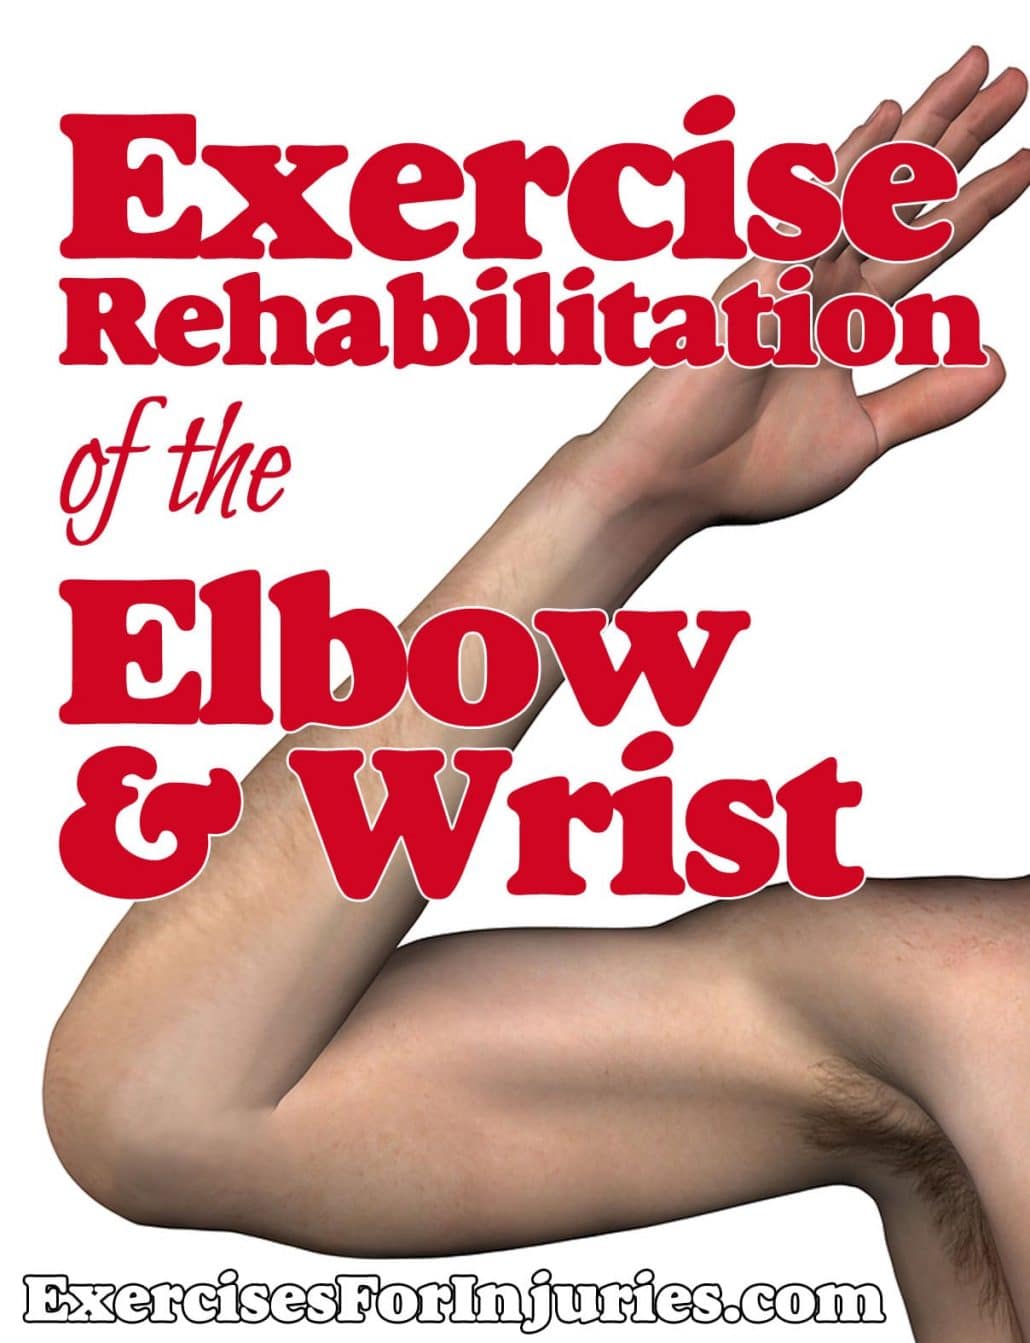 Exercise Rehabilitation of the Elbow and Wrist